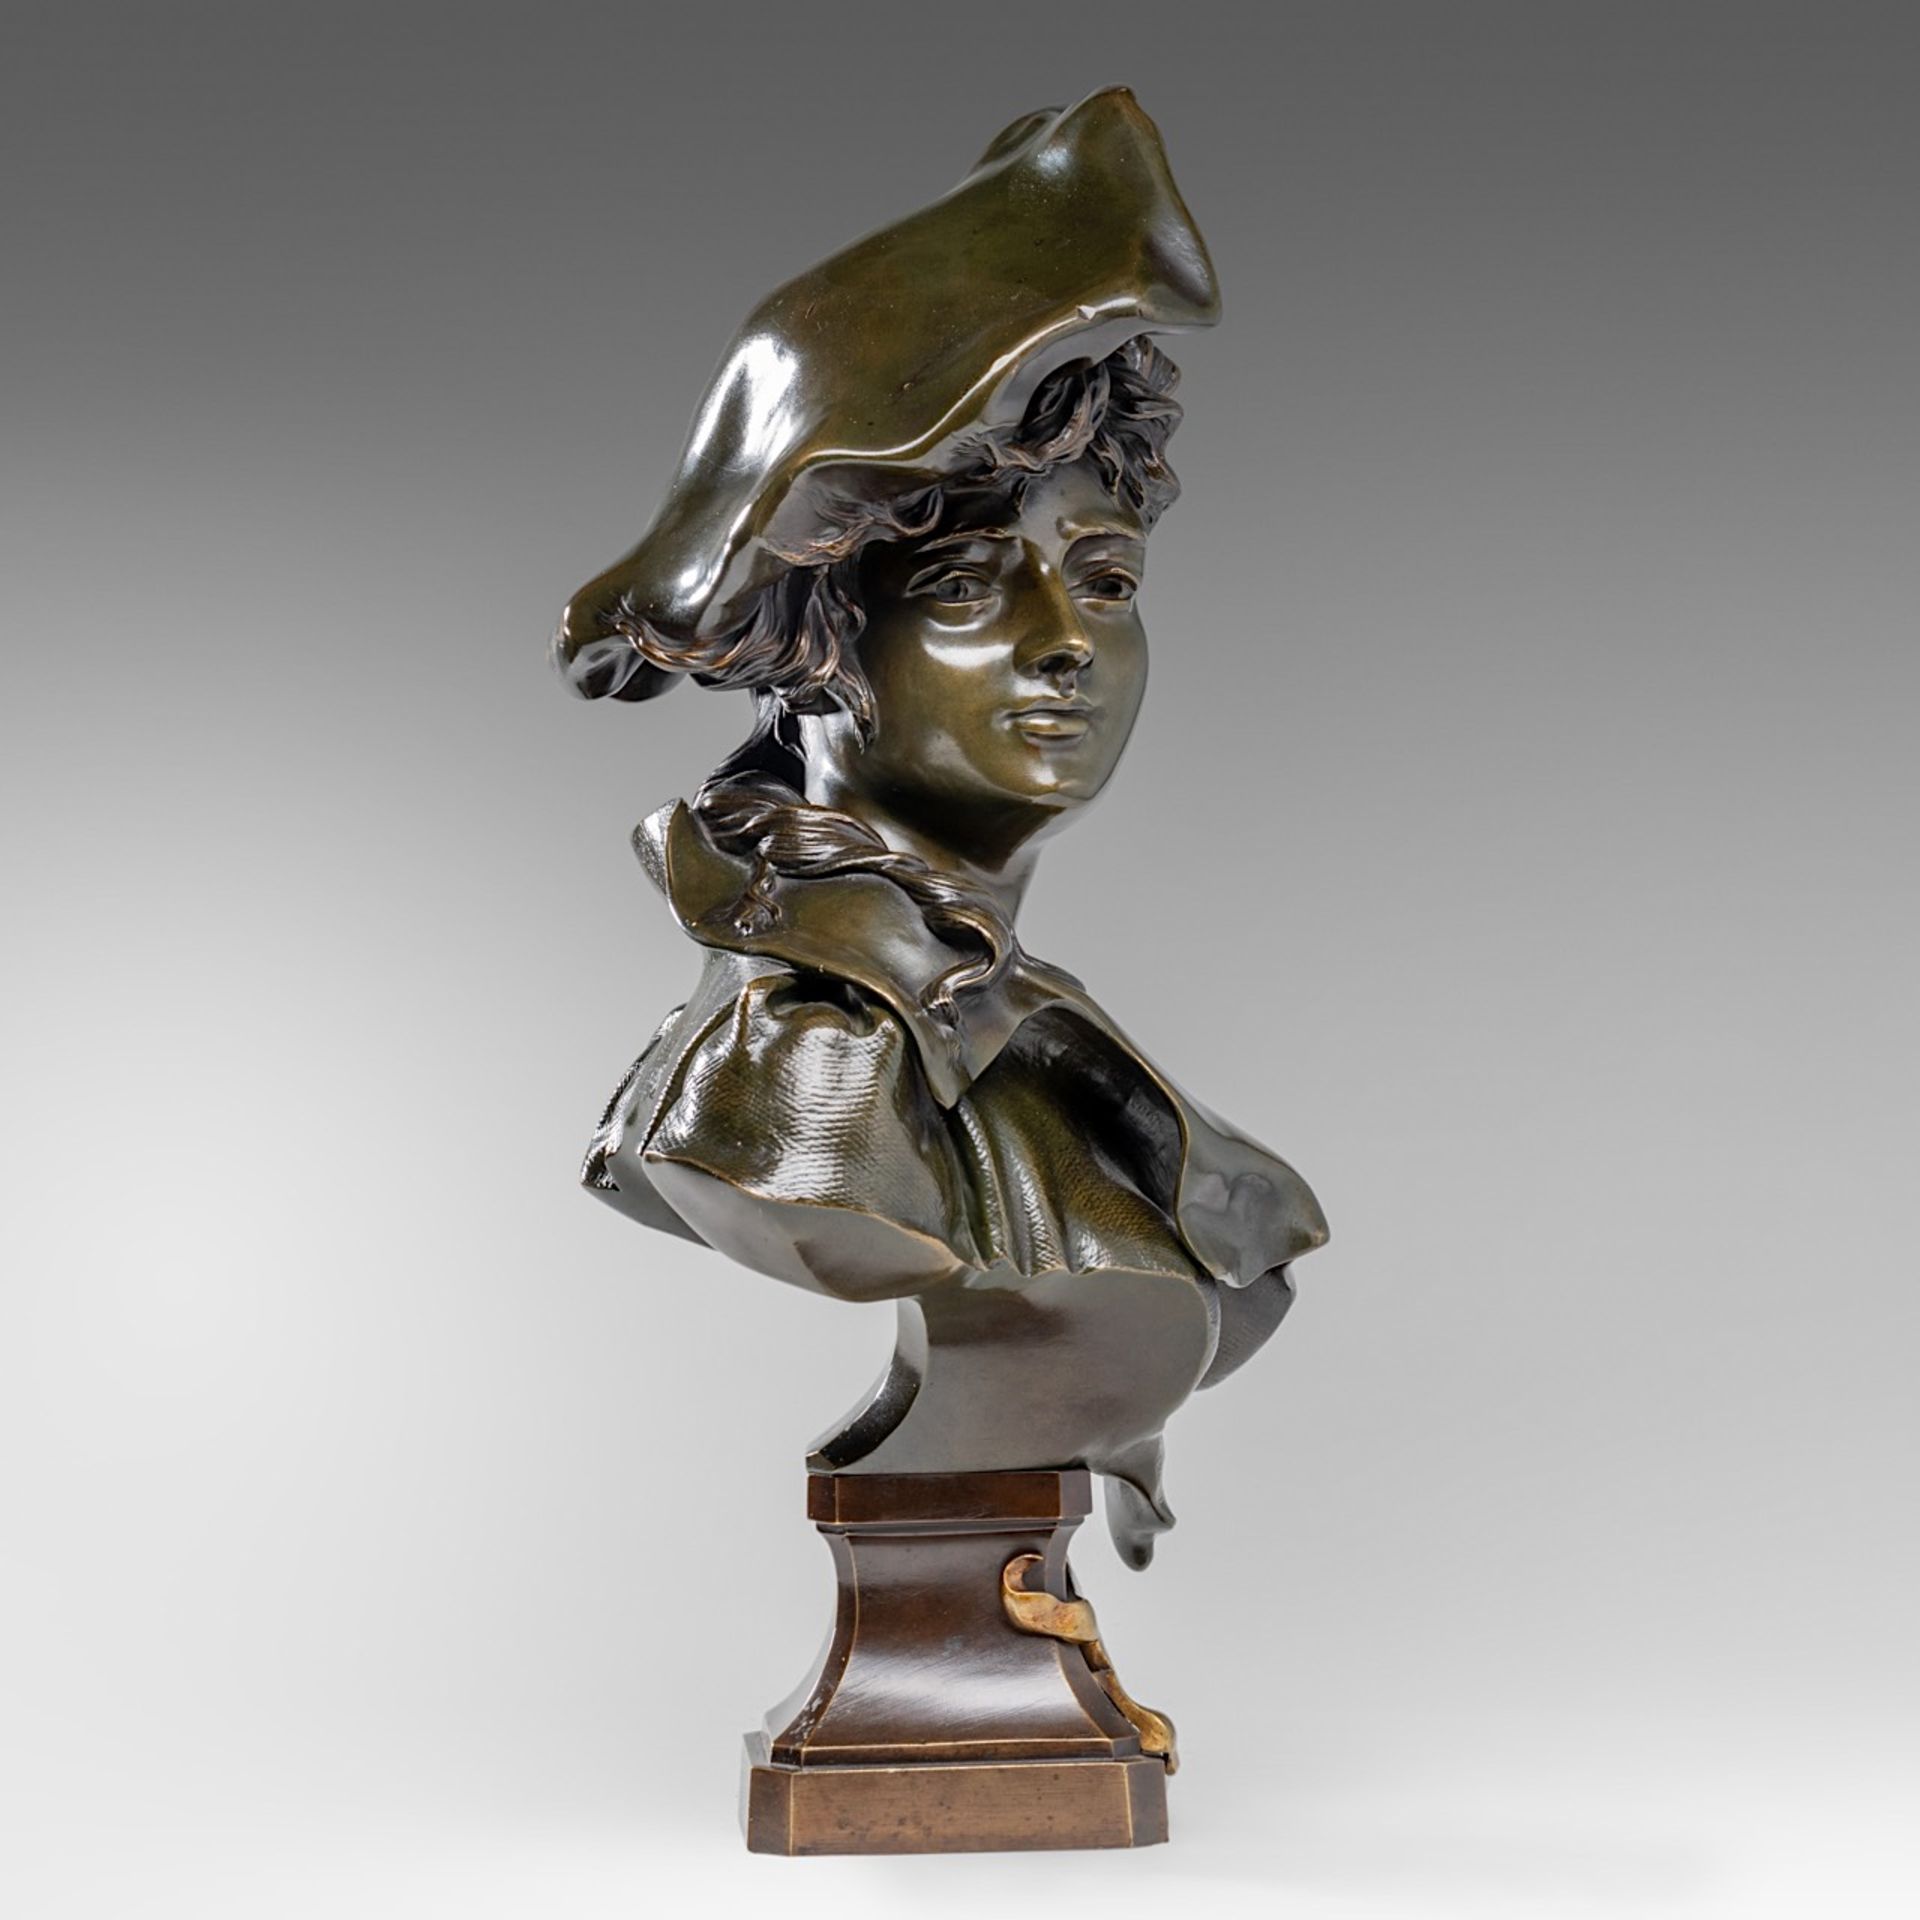 Anton Nelson (1849-1910), 'Fantasia', green patinated bronze bust, H 48 cm - Image 6 of 11